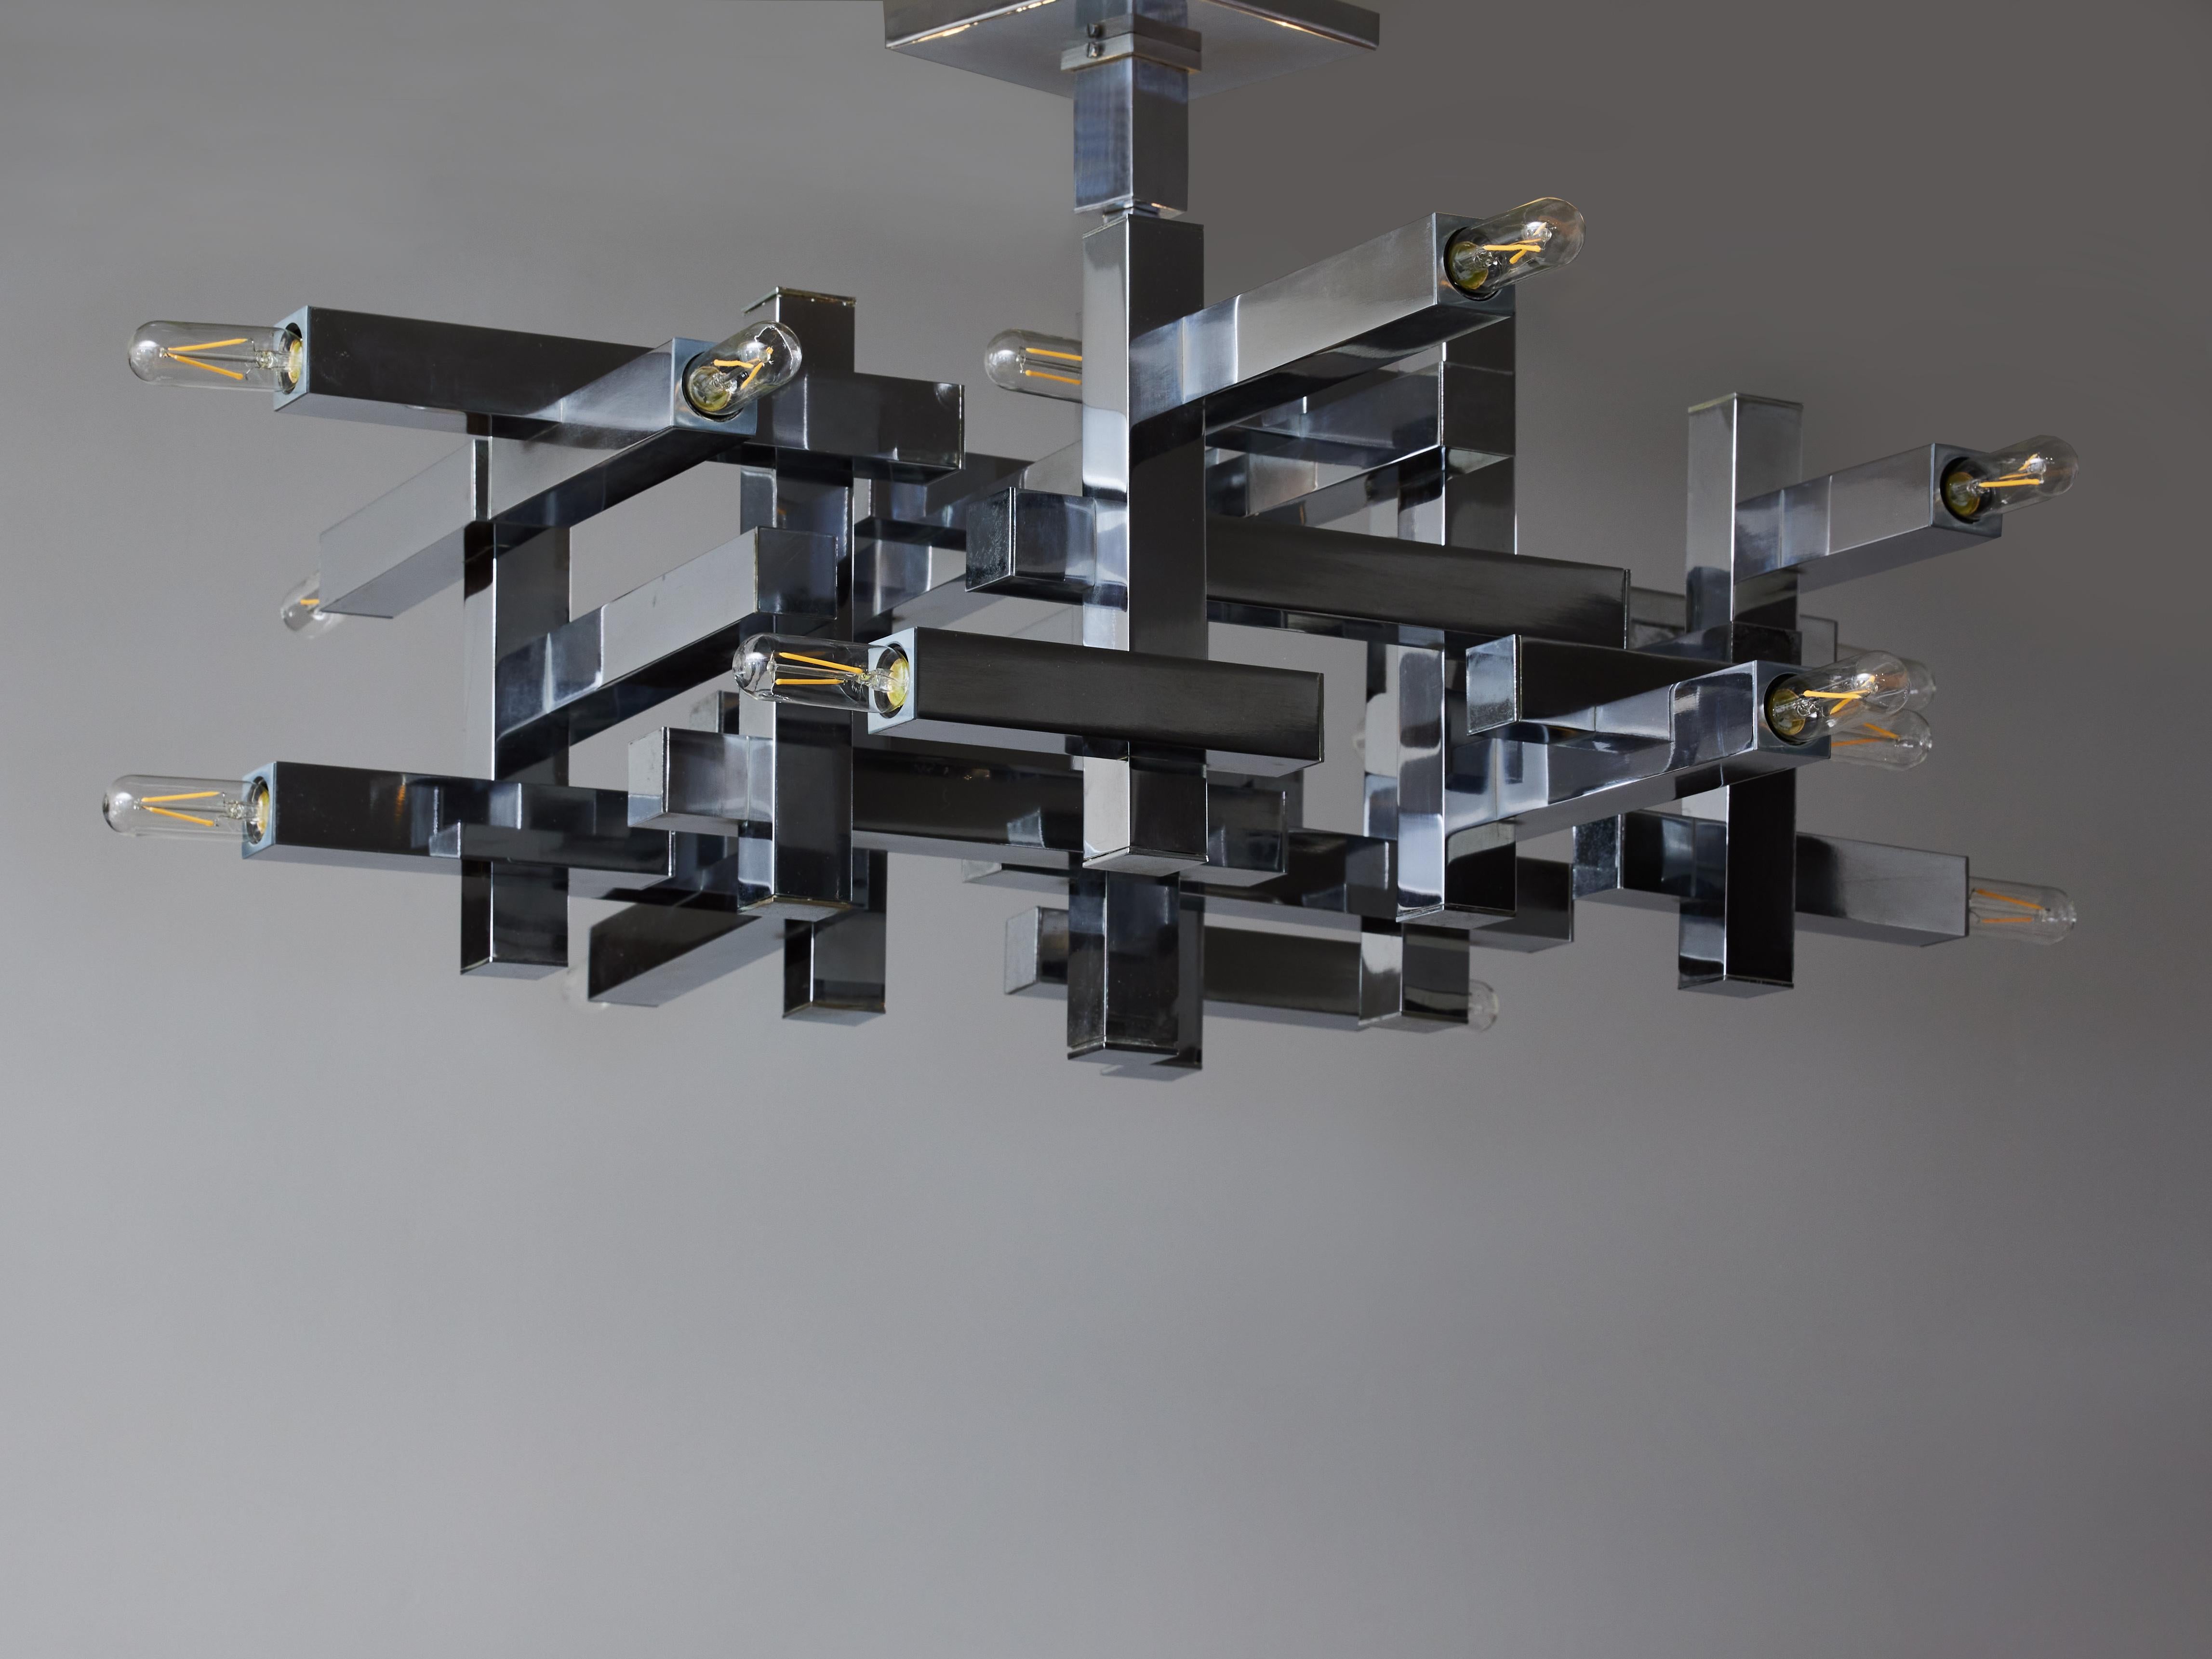 Cubist chandelier by Gaetano Sciolari made of square tubes geometrically assembled from which come out eighteen sources of light. 

Angelo Gaetano Sciolari 
Angelo Gaetano Sciolari (1927-1994) was the owner of Sciolari Lighting and designer for